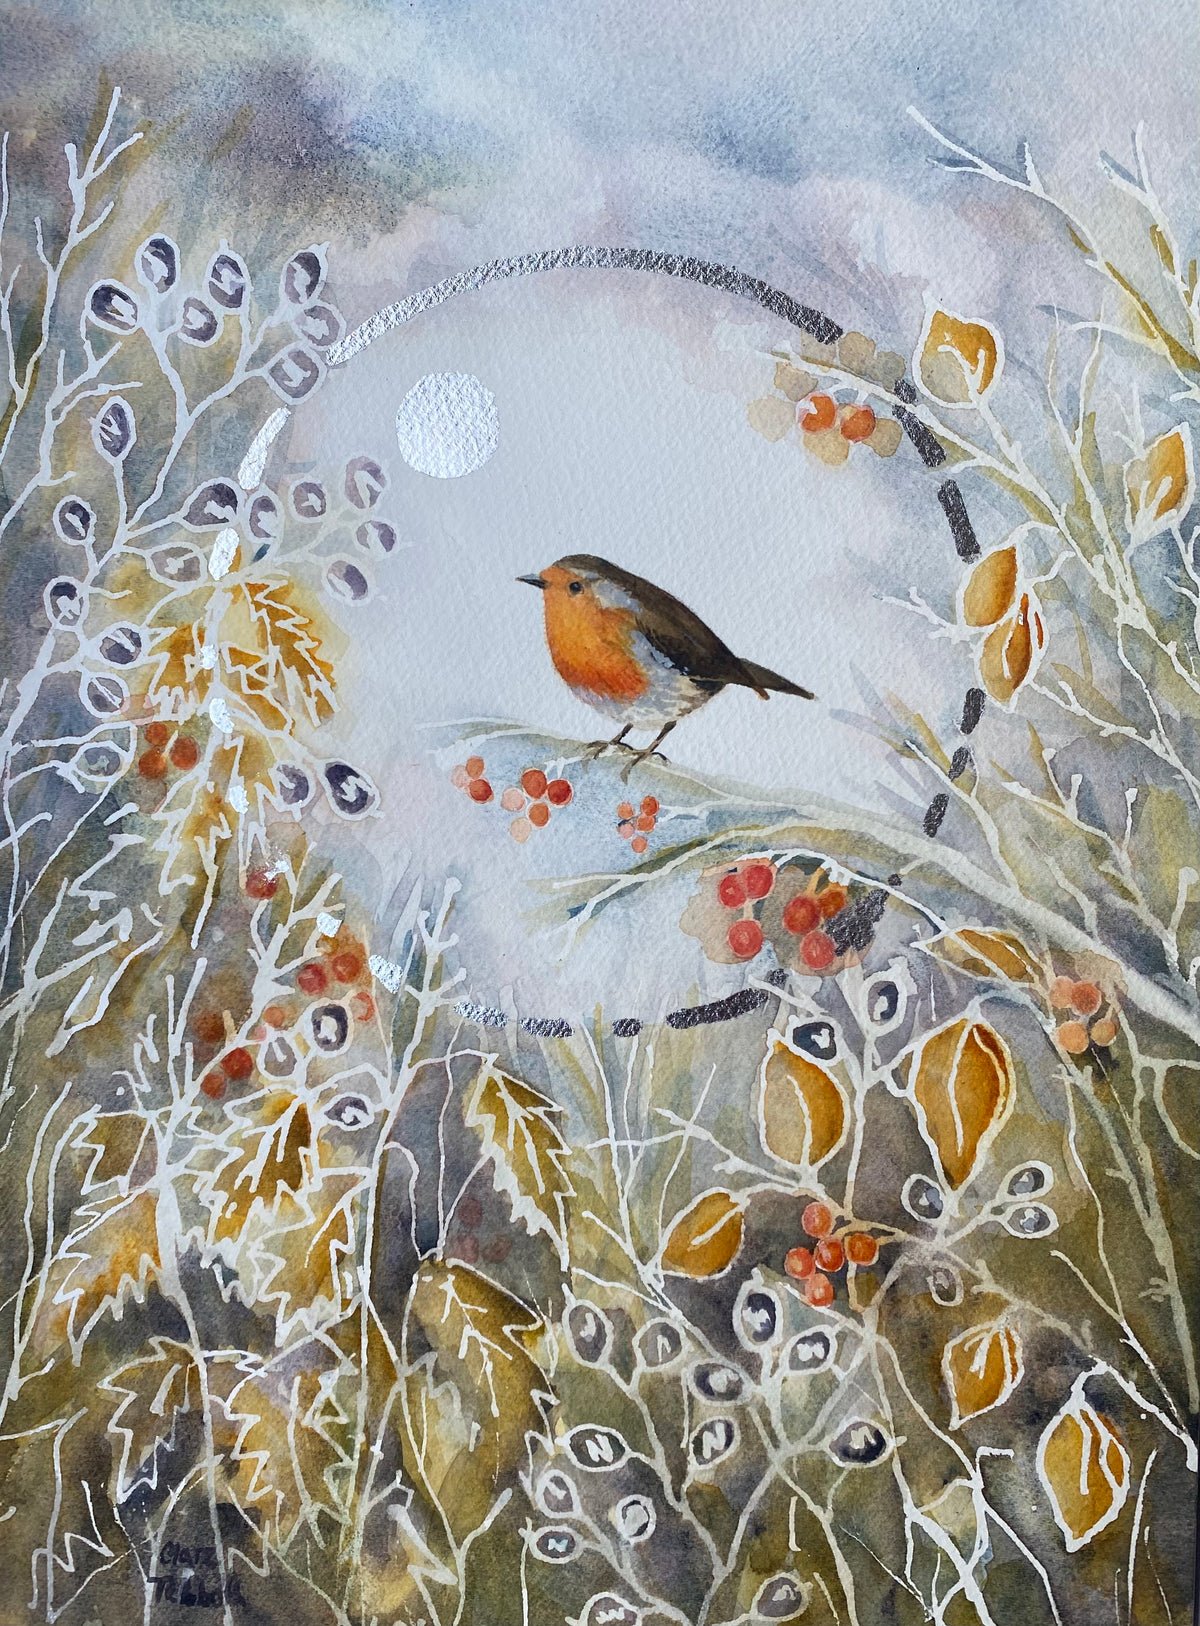 Little Robin by Clare Tebboth